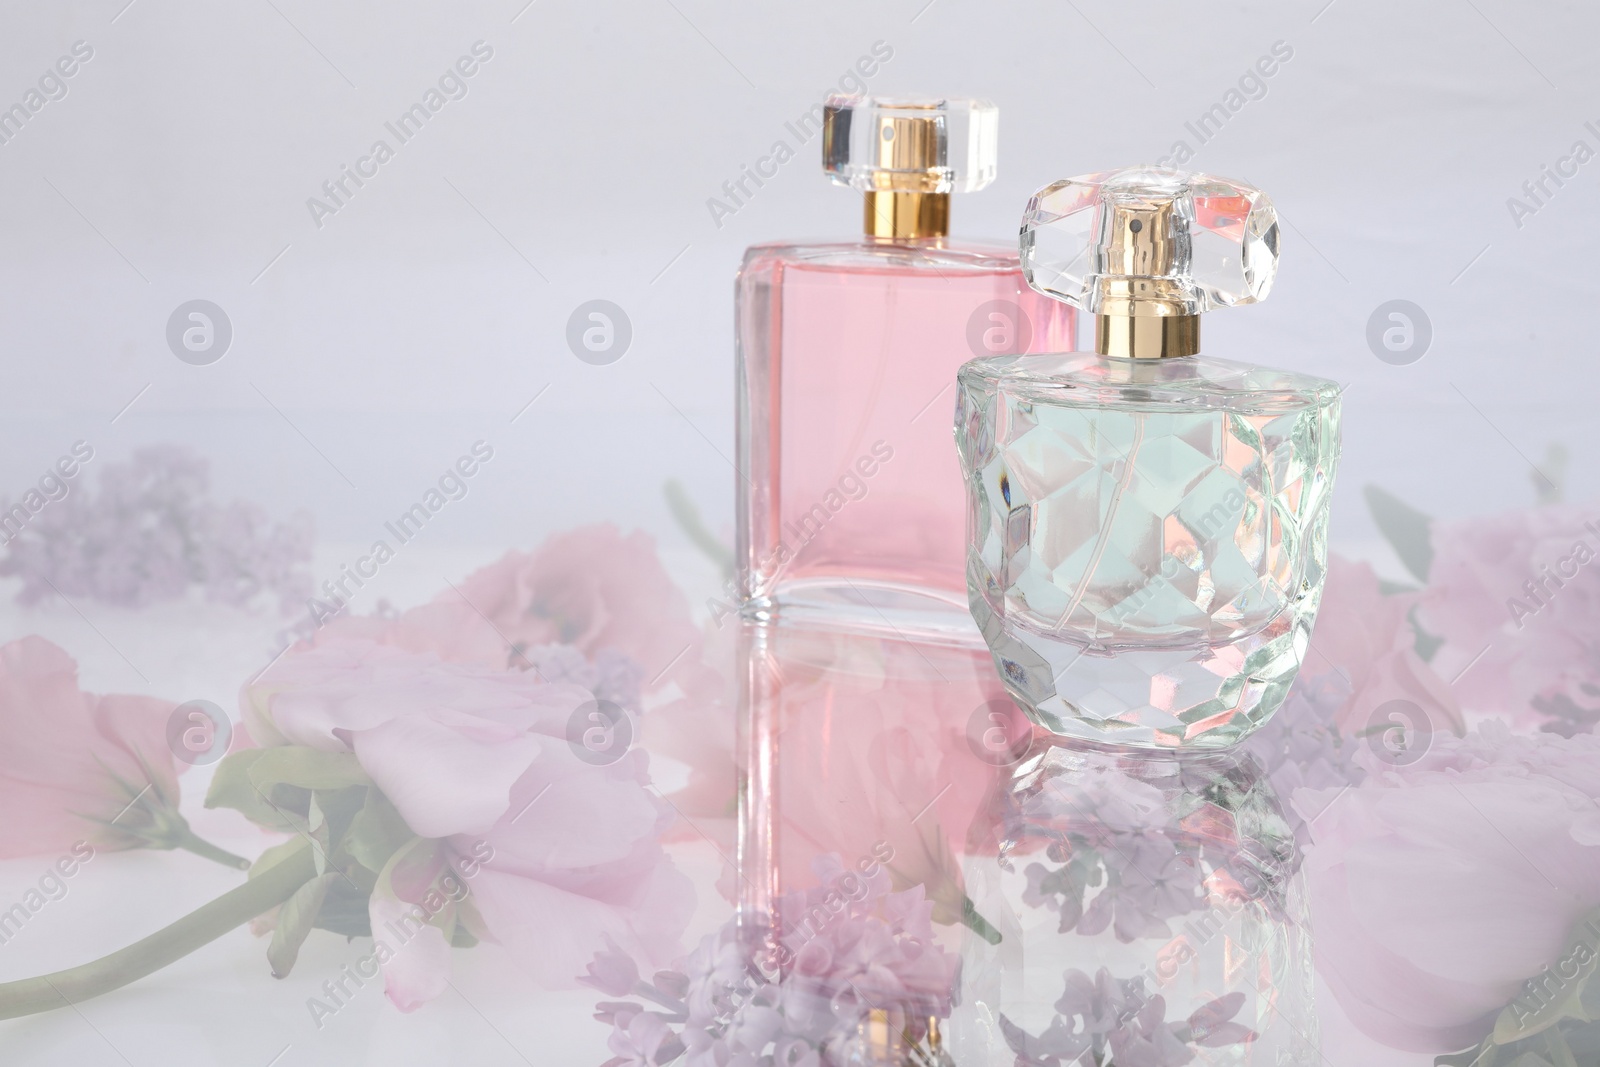 Photo of Luxury perfumes on spring floral decor, space for text